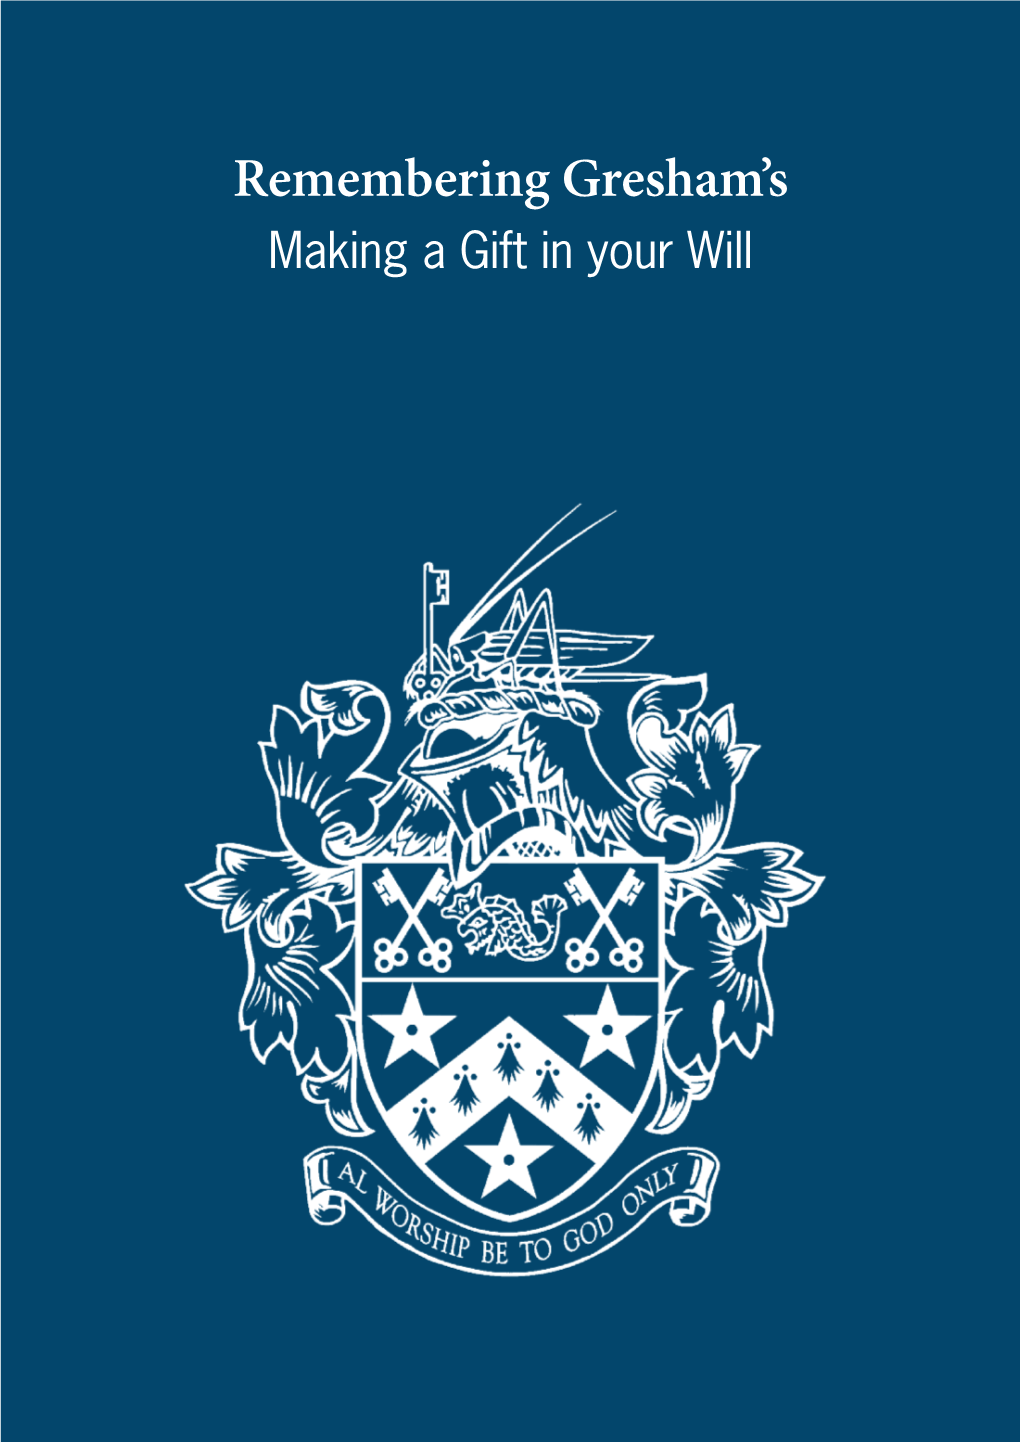 Making a Gift in Your Will